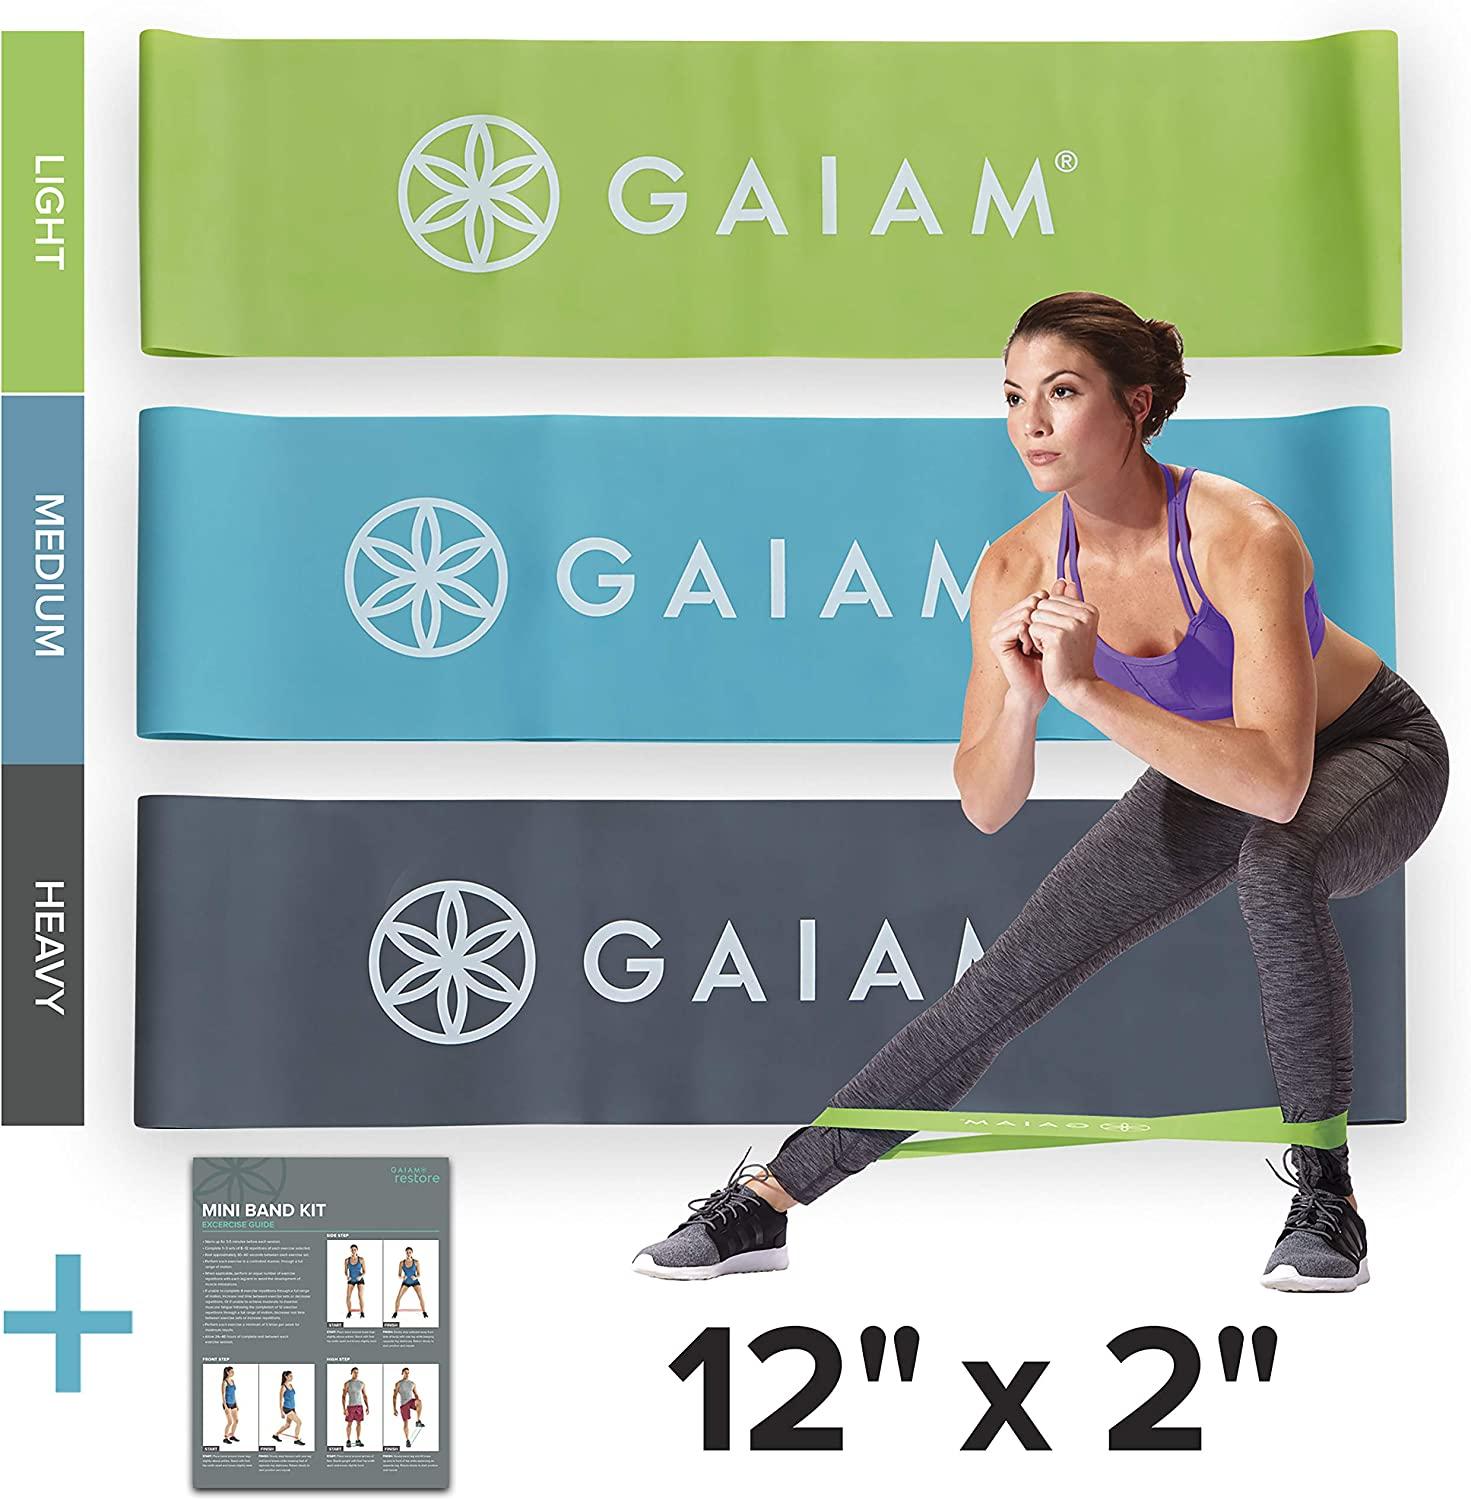 Gaiam Restore Mini Band Kit, Set of 3, Light, Medium, Heavy Lower Body Loop  Resistance Bands for Legs and Booty Exercises & Workouts, 12 x 2 Bands